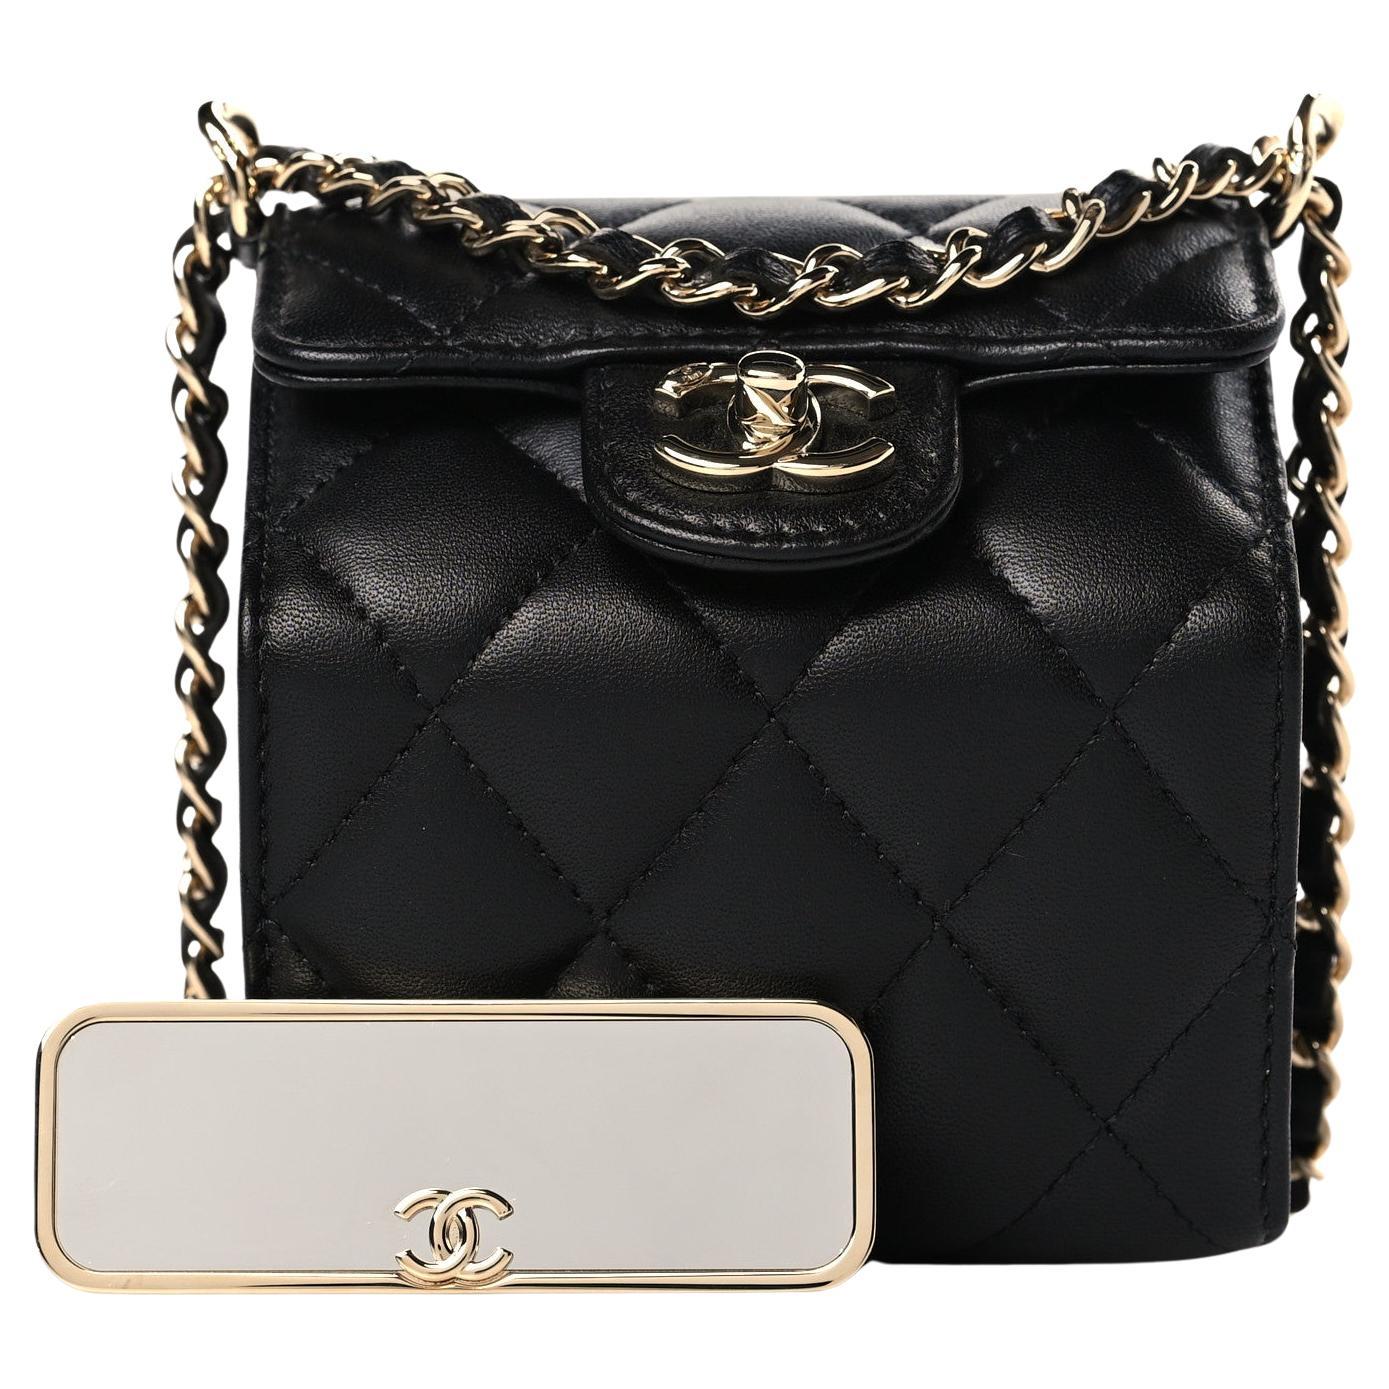 Chanel Rare Roll Up Accordion Mini Flap Bag Jewelry Box Quilted Leather Bag

Gold hardware

Black quilted lambskin
Leather and chain-link shoulder strap
Foldover top
Signature interlocking CC turn-lock fastening
Main compartment
Partitioned